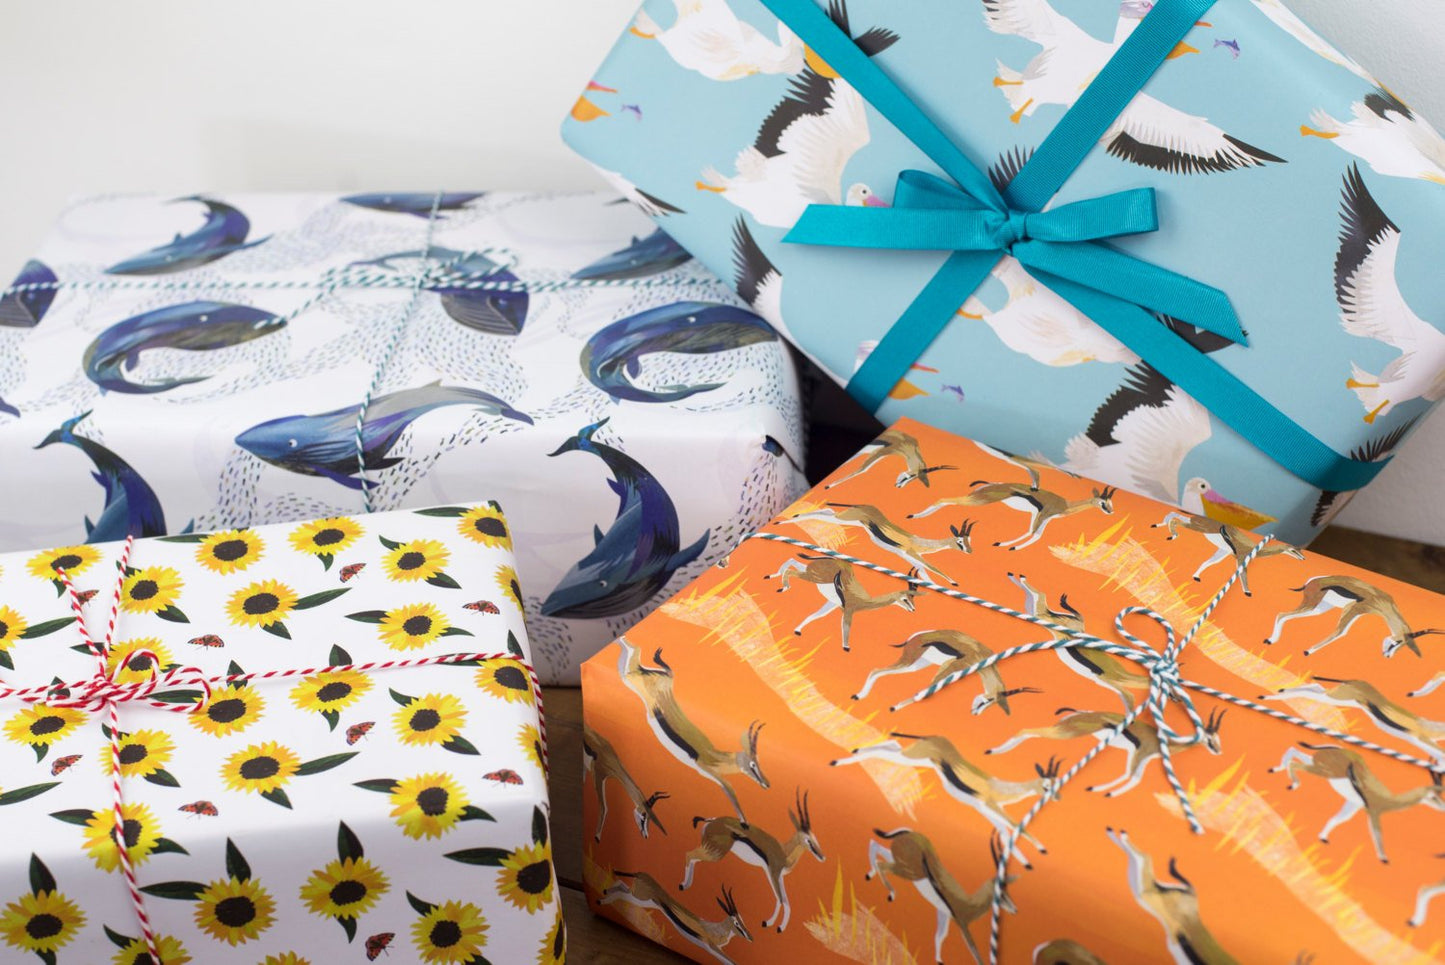 Whales in the Water Luxury, 100% Recycled Wrapping Paper